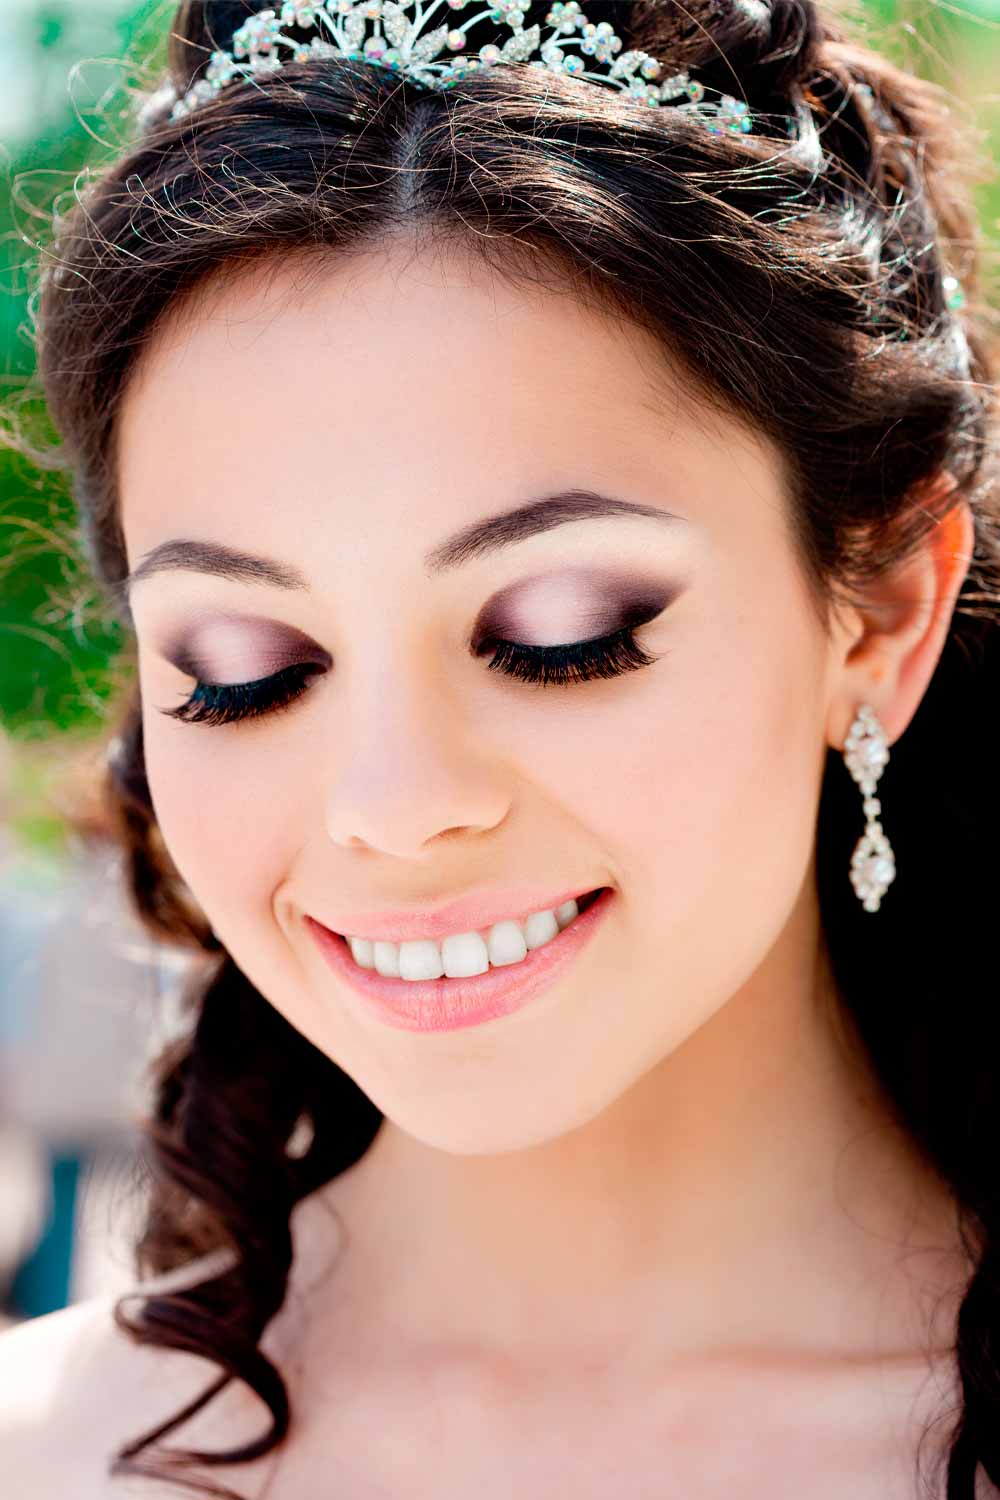 How To Prepare Your Skin For Wedding Makeup